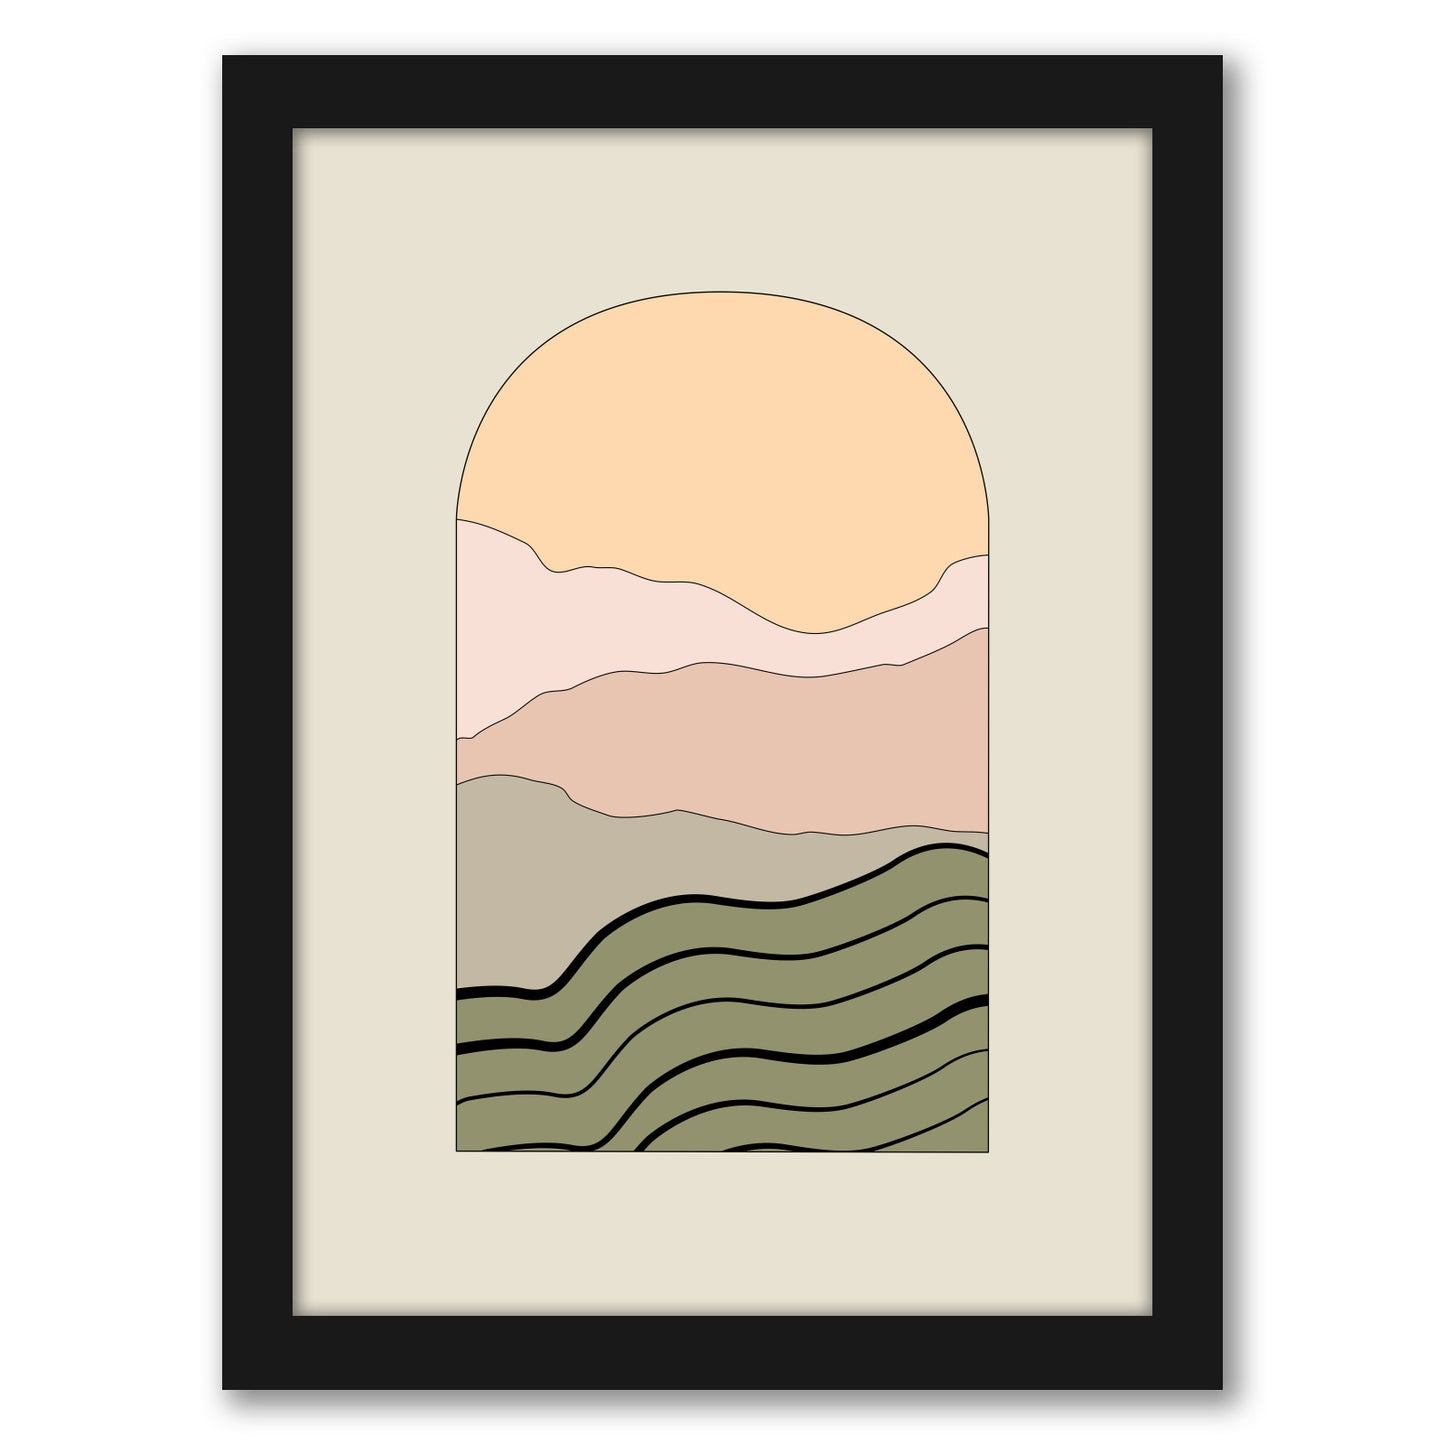 Mid Century Neutral Abstract Landscape 3 by The Print Republic - Canvas, Poster or Framed Print